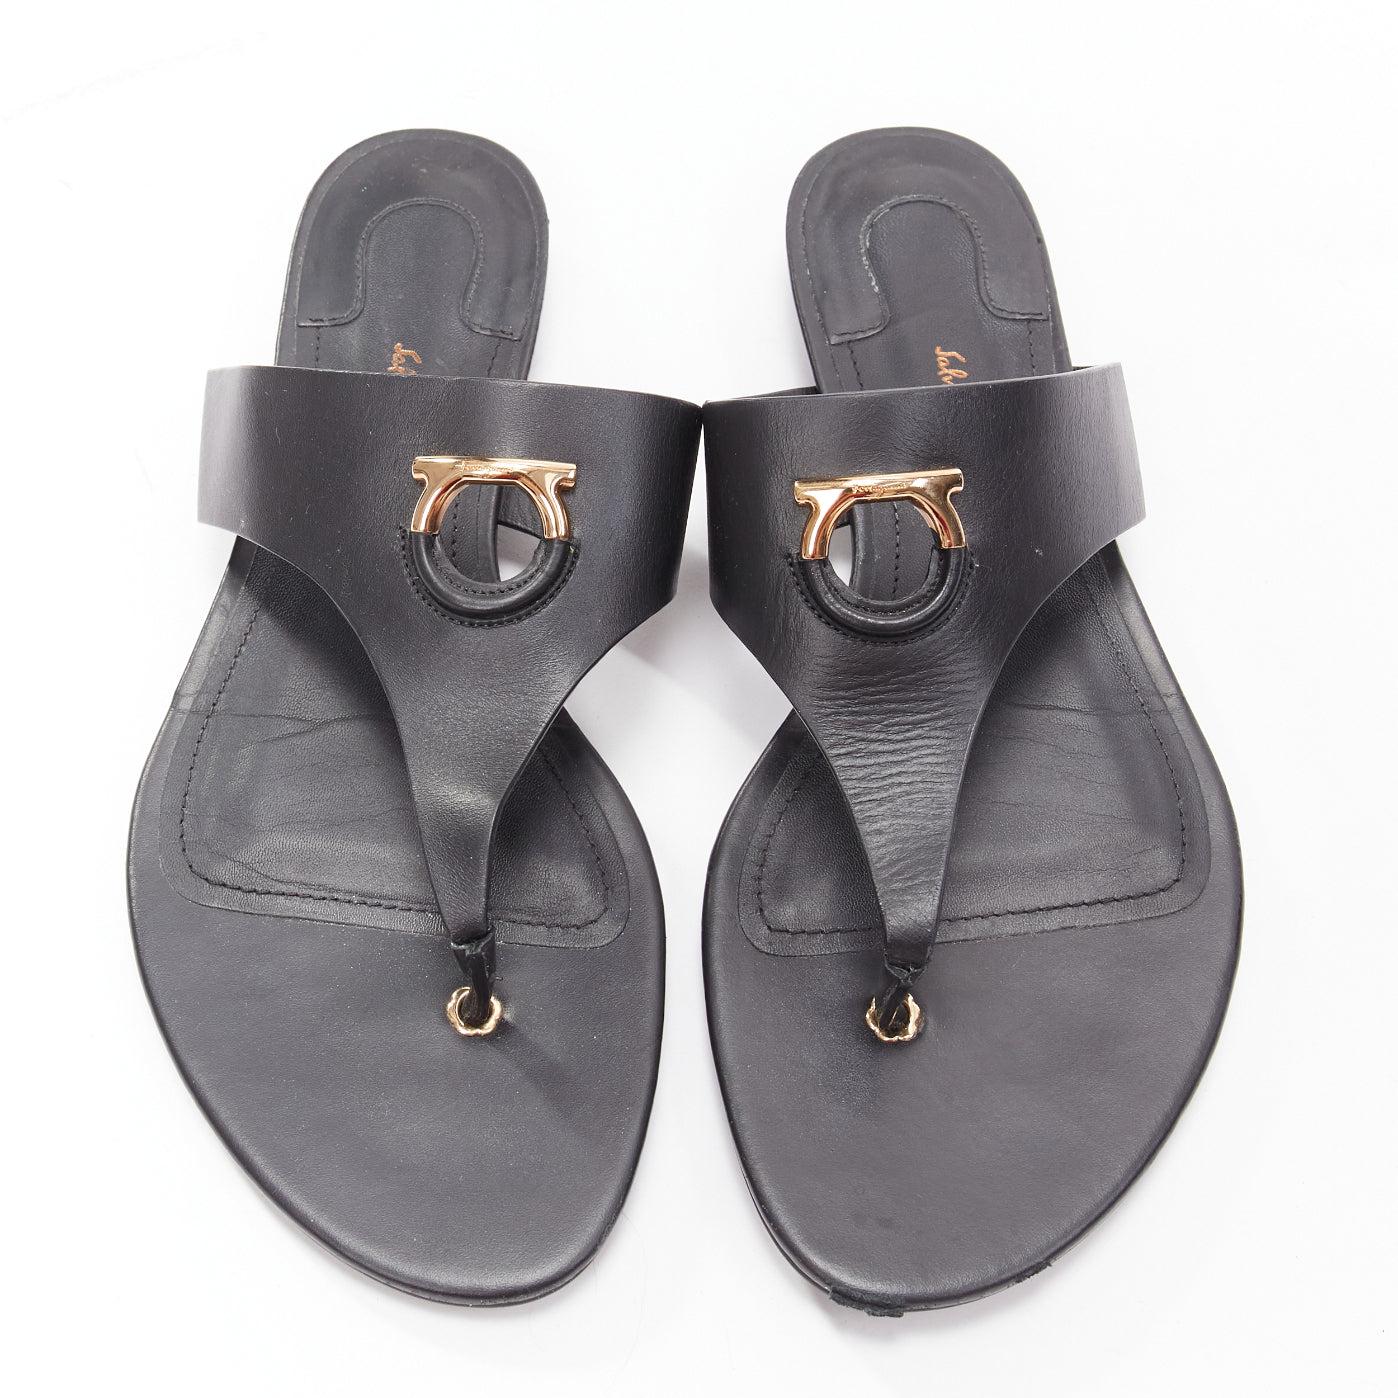 SALVATORE FERRAGAMO black leather rose gold logo ring thong sandals EU37.5
Reference: LNKO/A02292
Brand: Salvatore Ferragamo
Material: Leather
Color: Black, Rose Gold
Pattern: Solid
Closure: Slip On
Lining: Black Leather
Extra Details: Rose gold